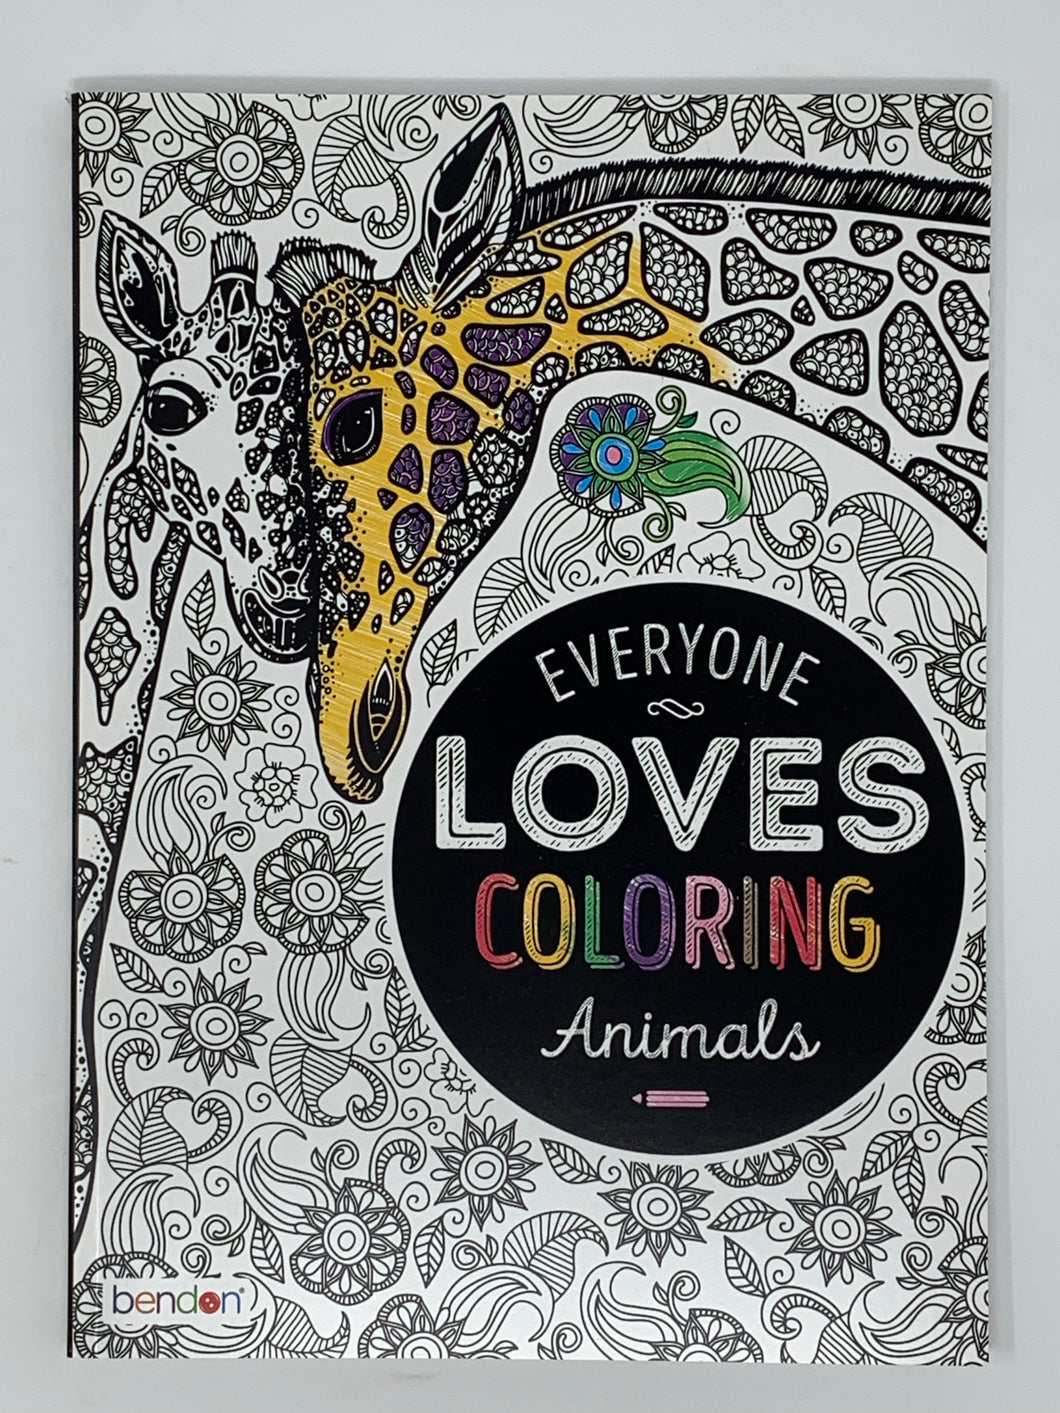 019933 - EVERYONE LOVES COLORING - ANIMALS